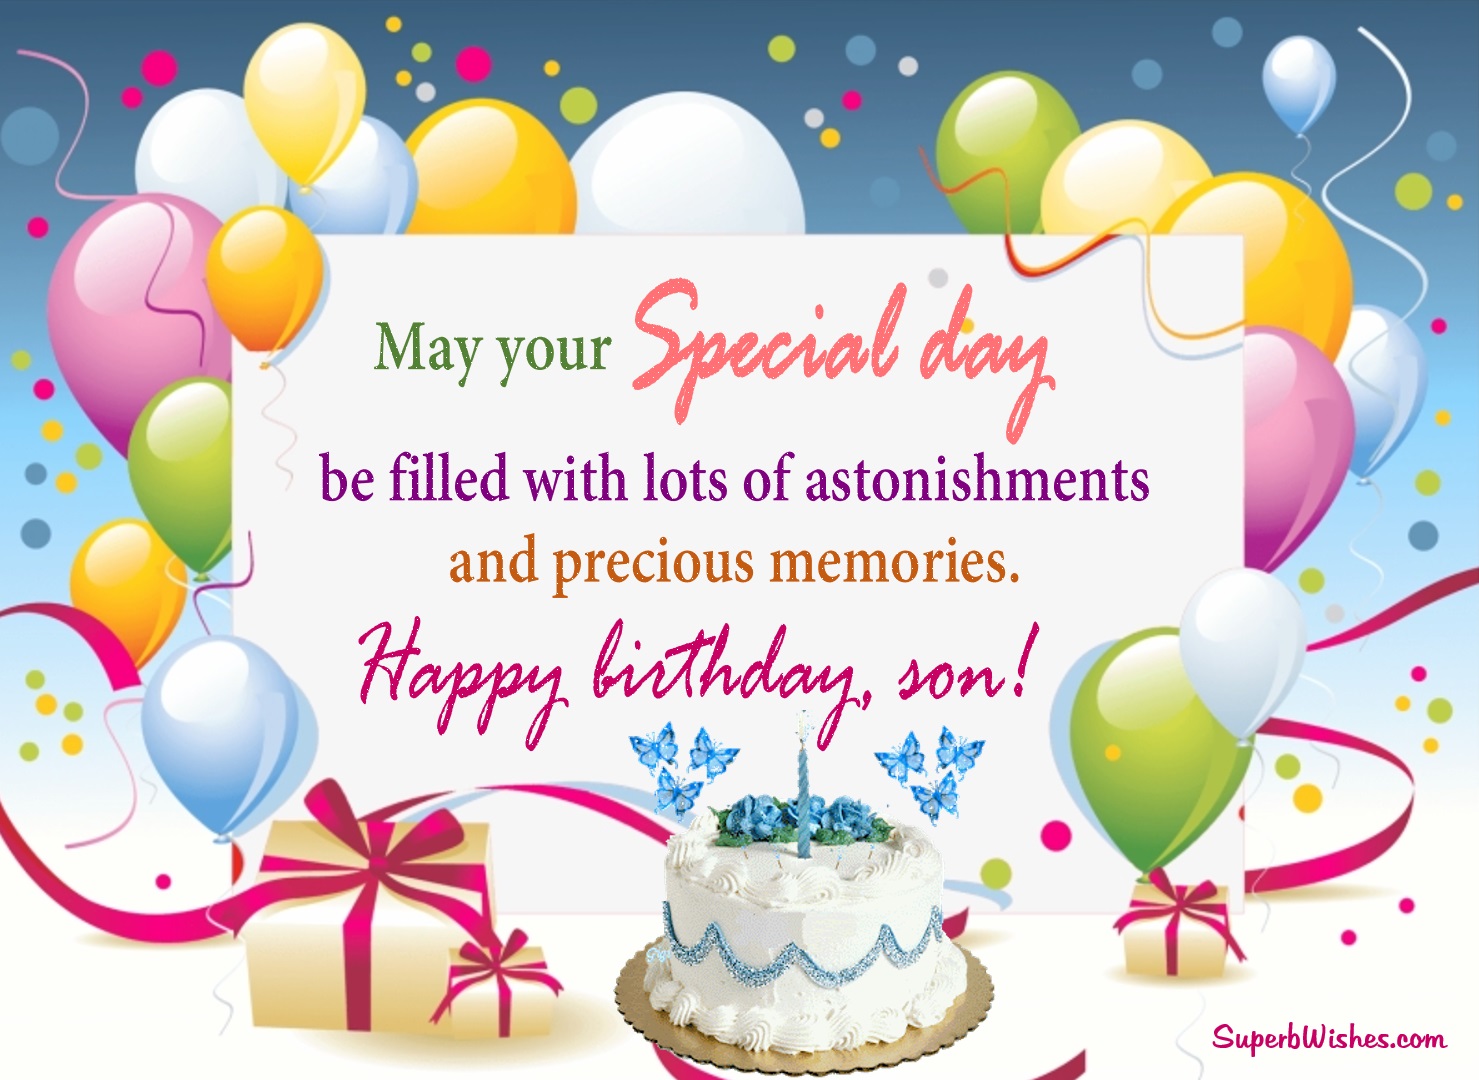 Free Happy Birthday Wishes For Son Images. Superbwishes.com